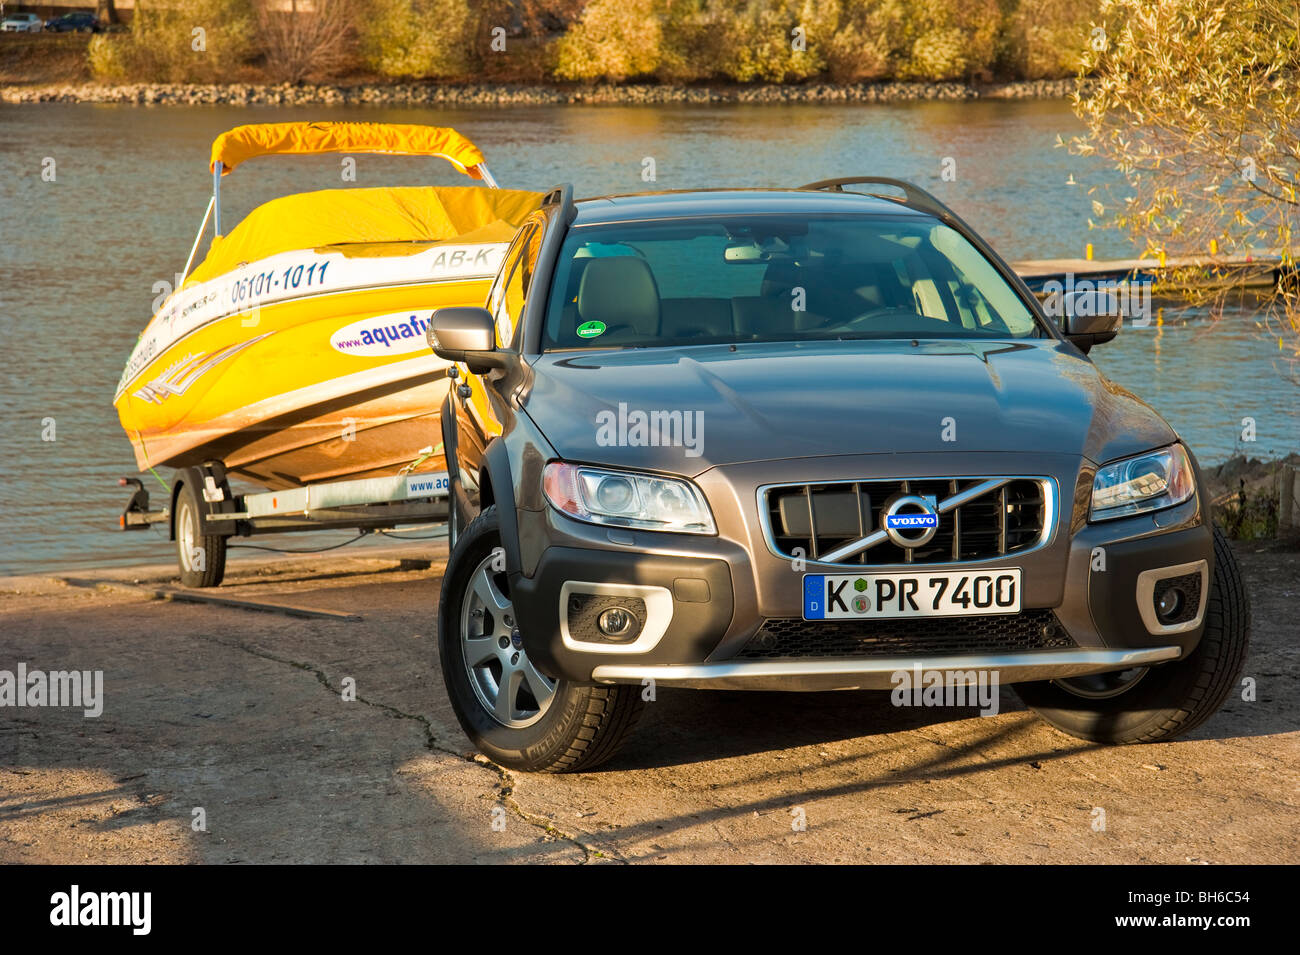 Volvo XC 70 towing a yellow ski power boat at Rhine river, Germany Stock Photo